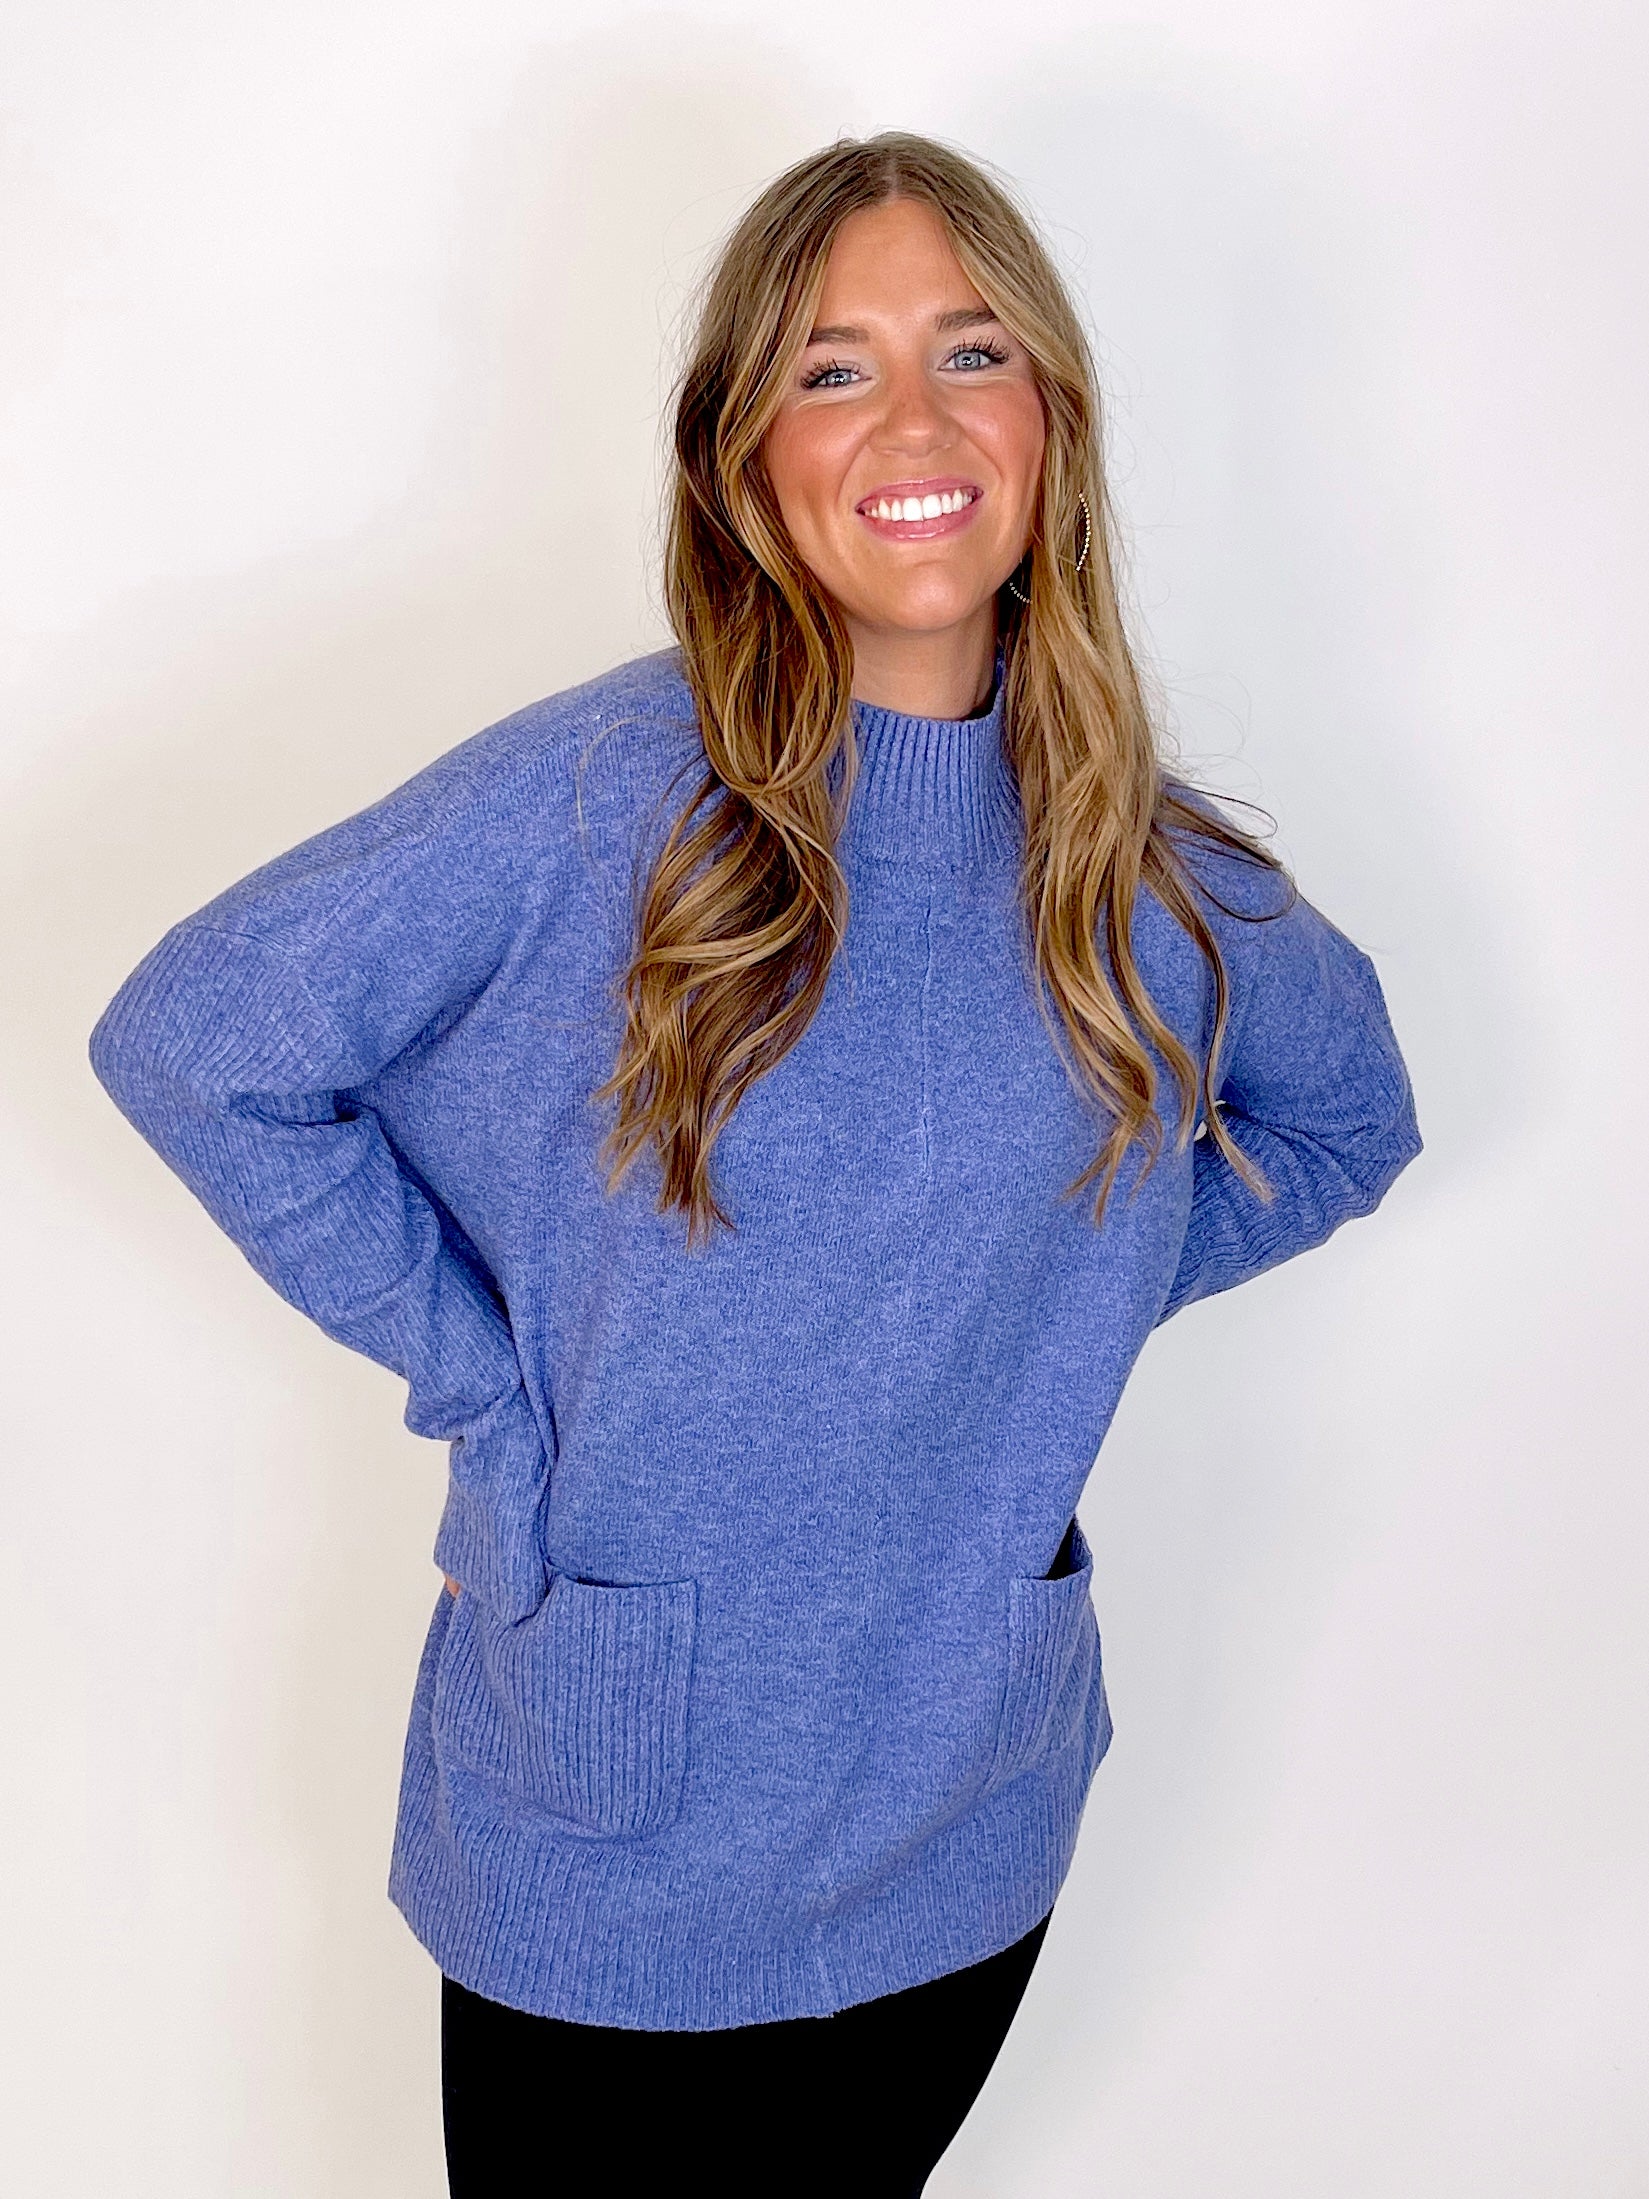 The Kori Sweater-Sweaters-Kori-The Village Shoppe, Women’s Fashion Boutique, Shop Online and In Store - Located in Muscle Shoals, AL.